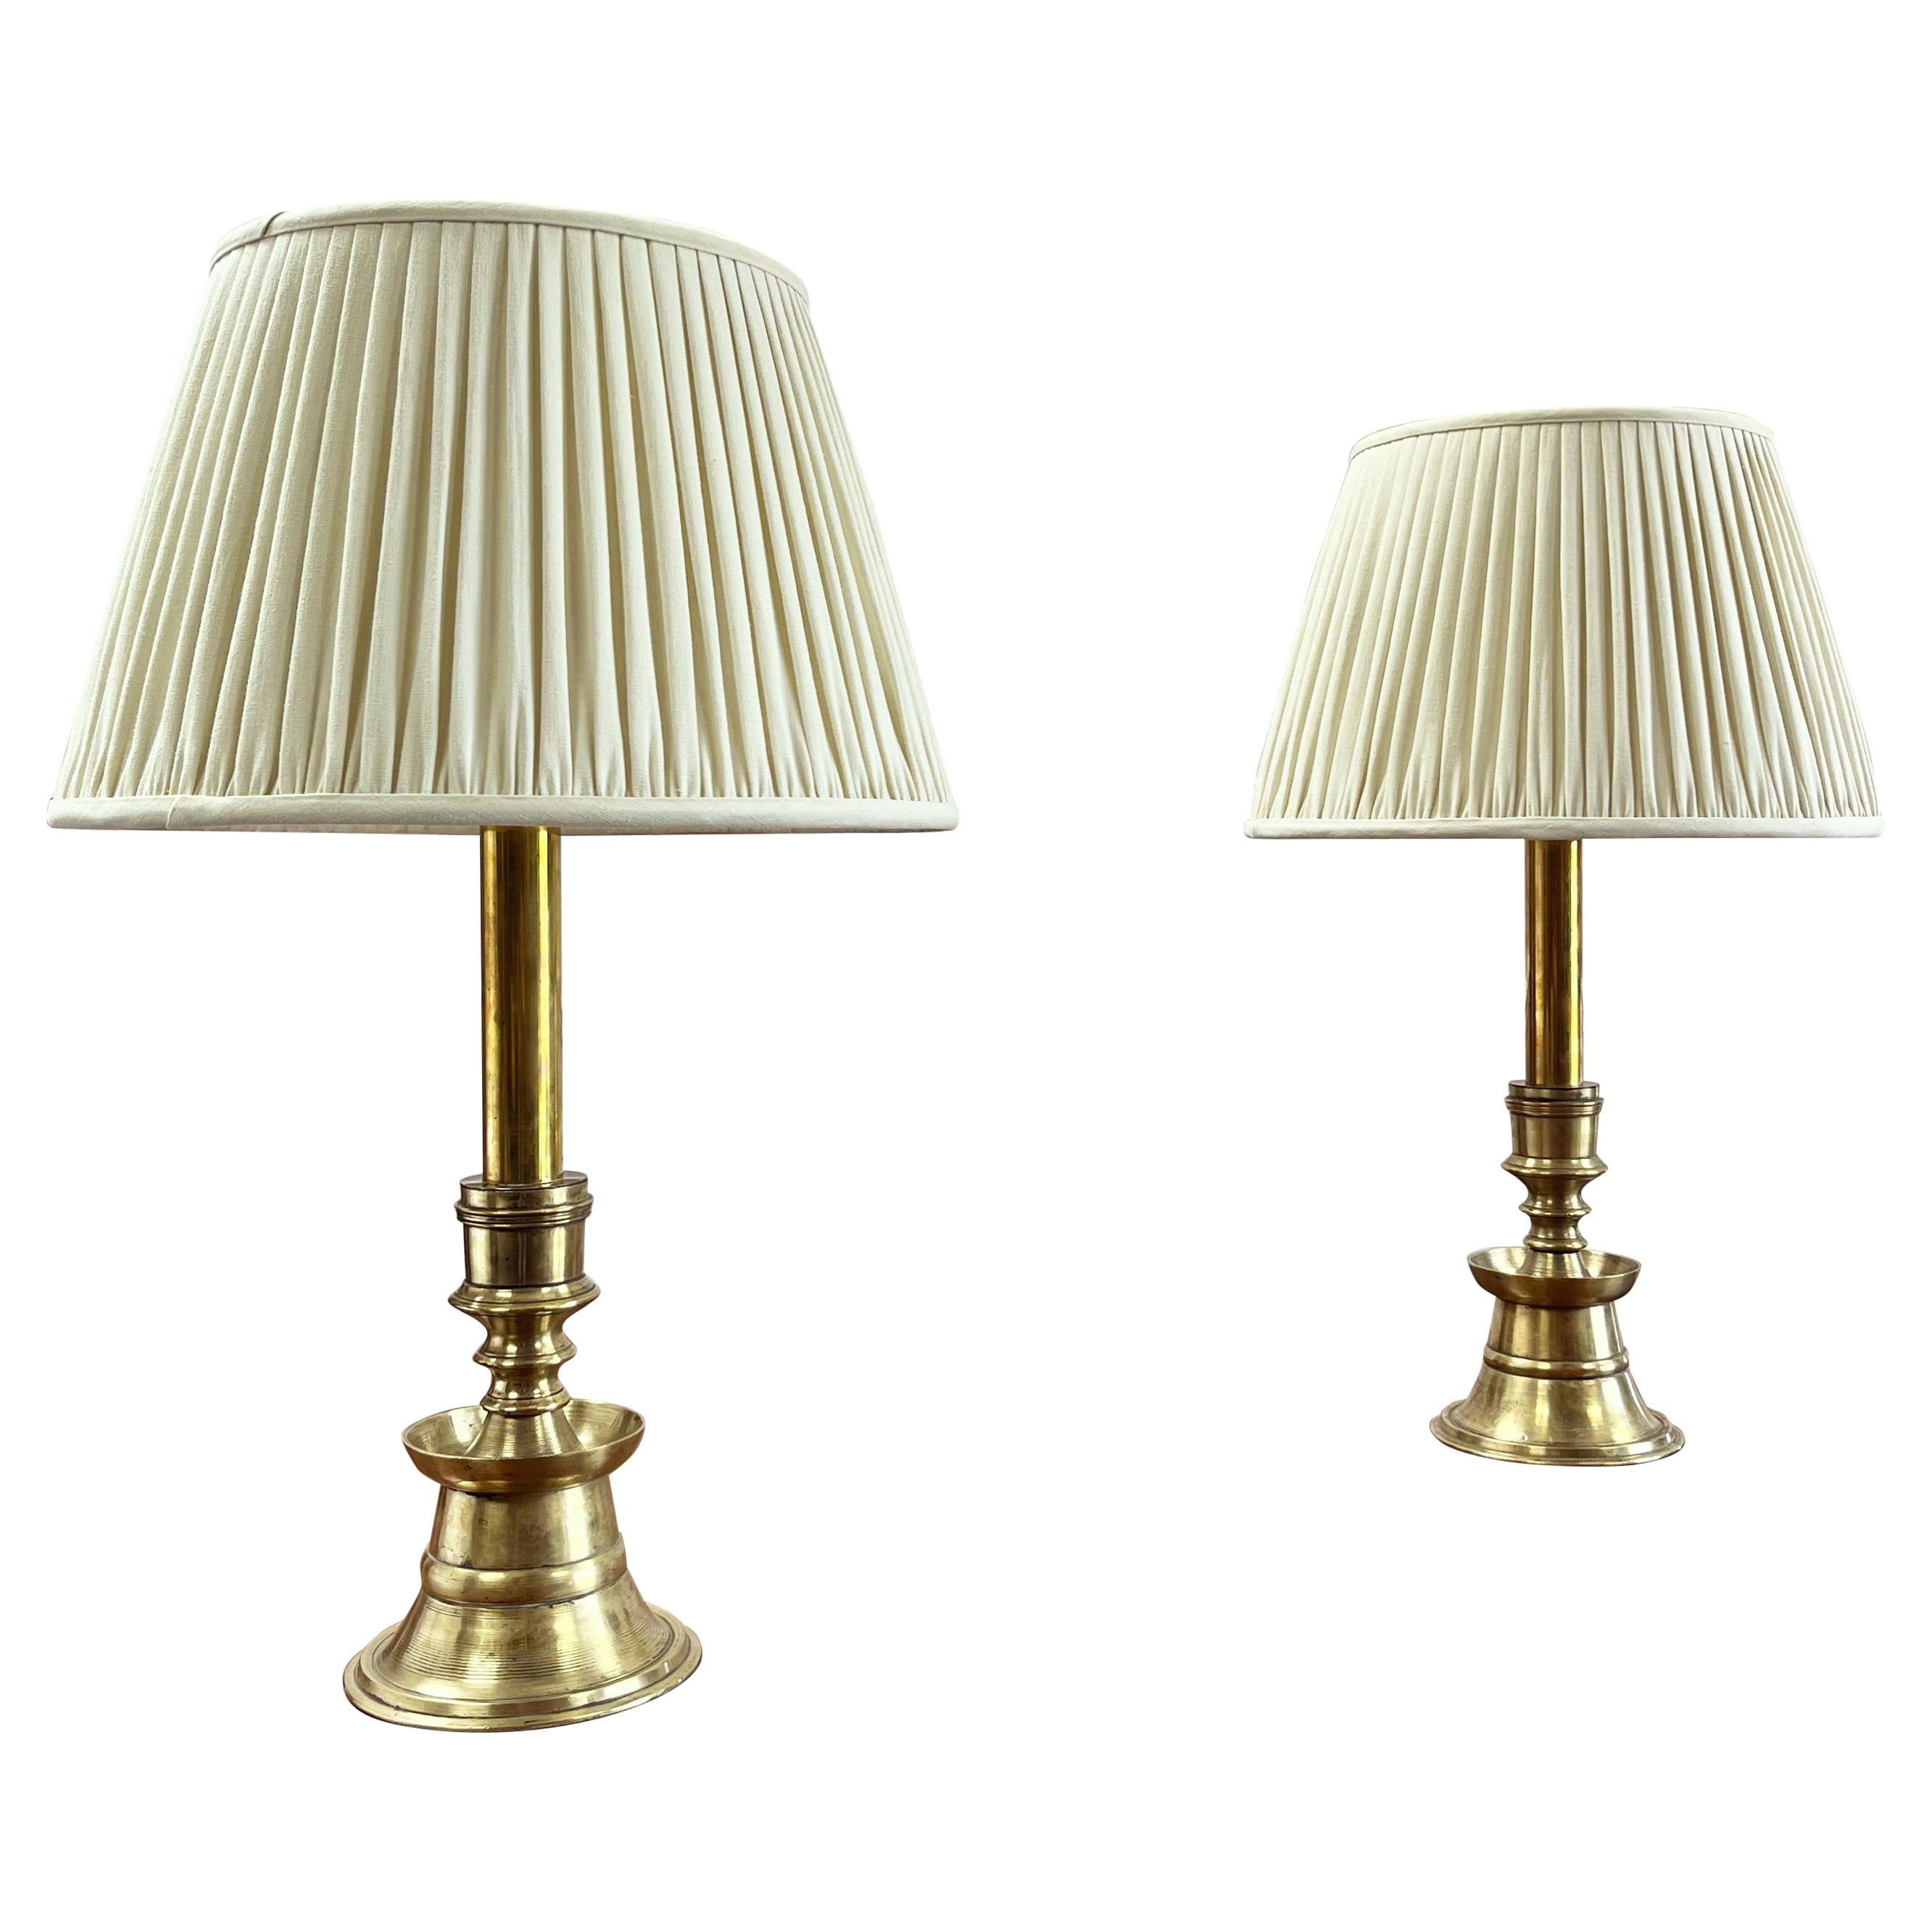 A Pair of Ottoman Candlesticks, Now as Lamps